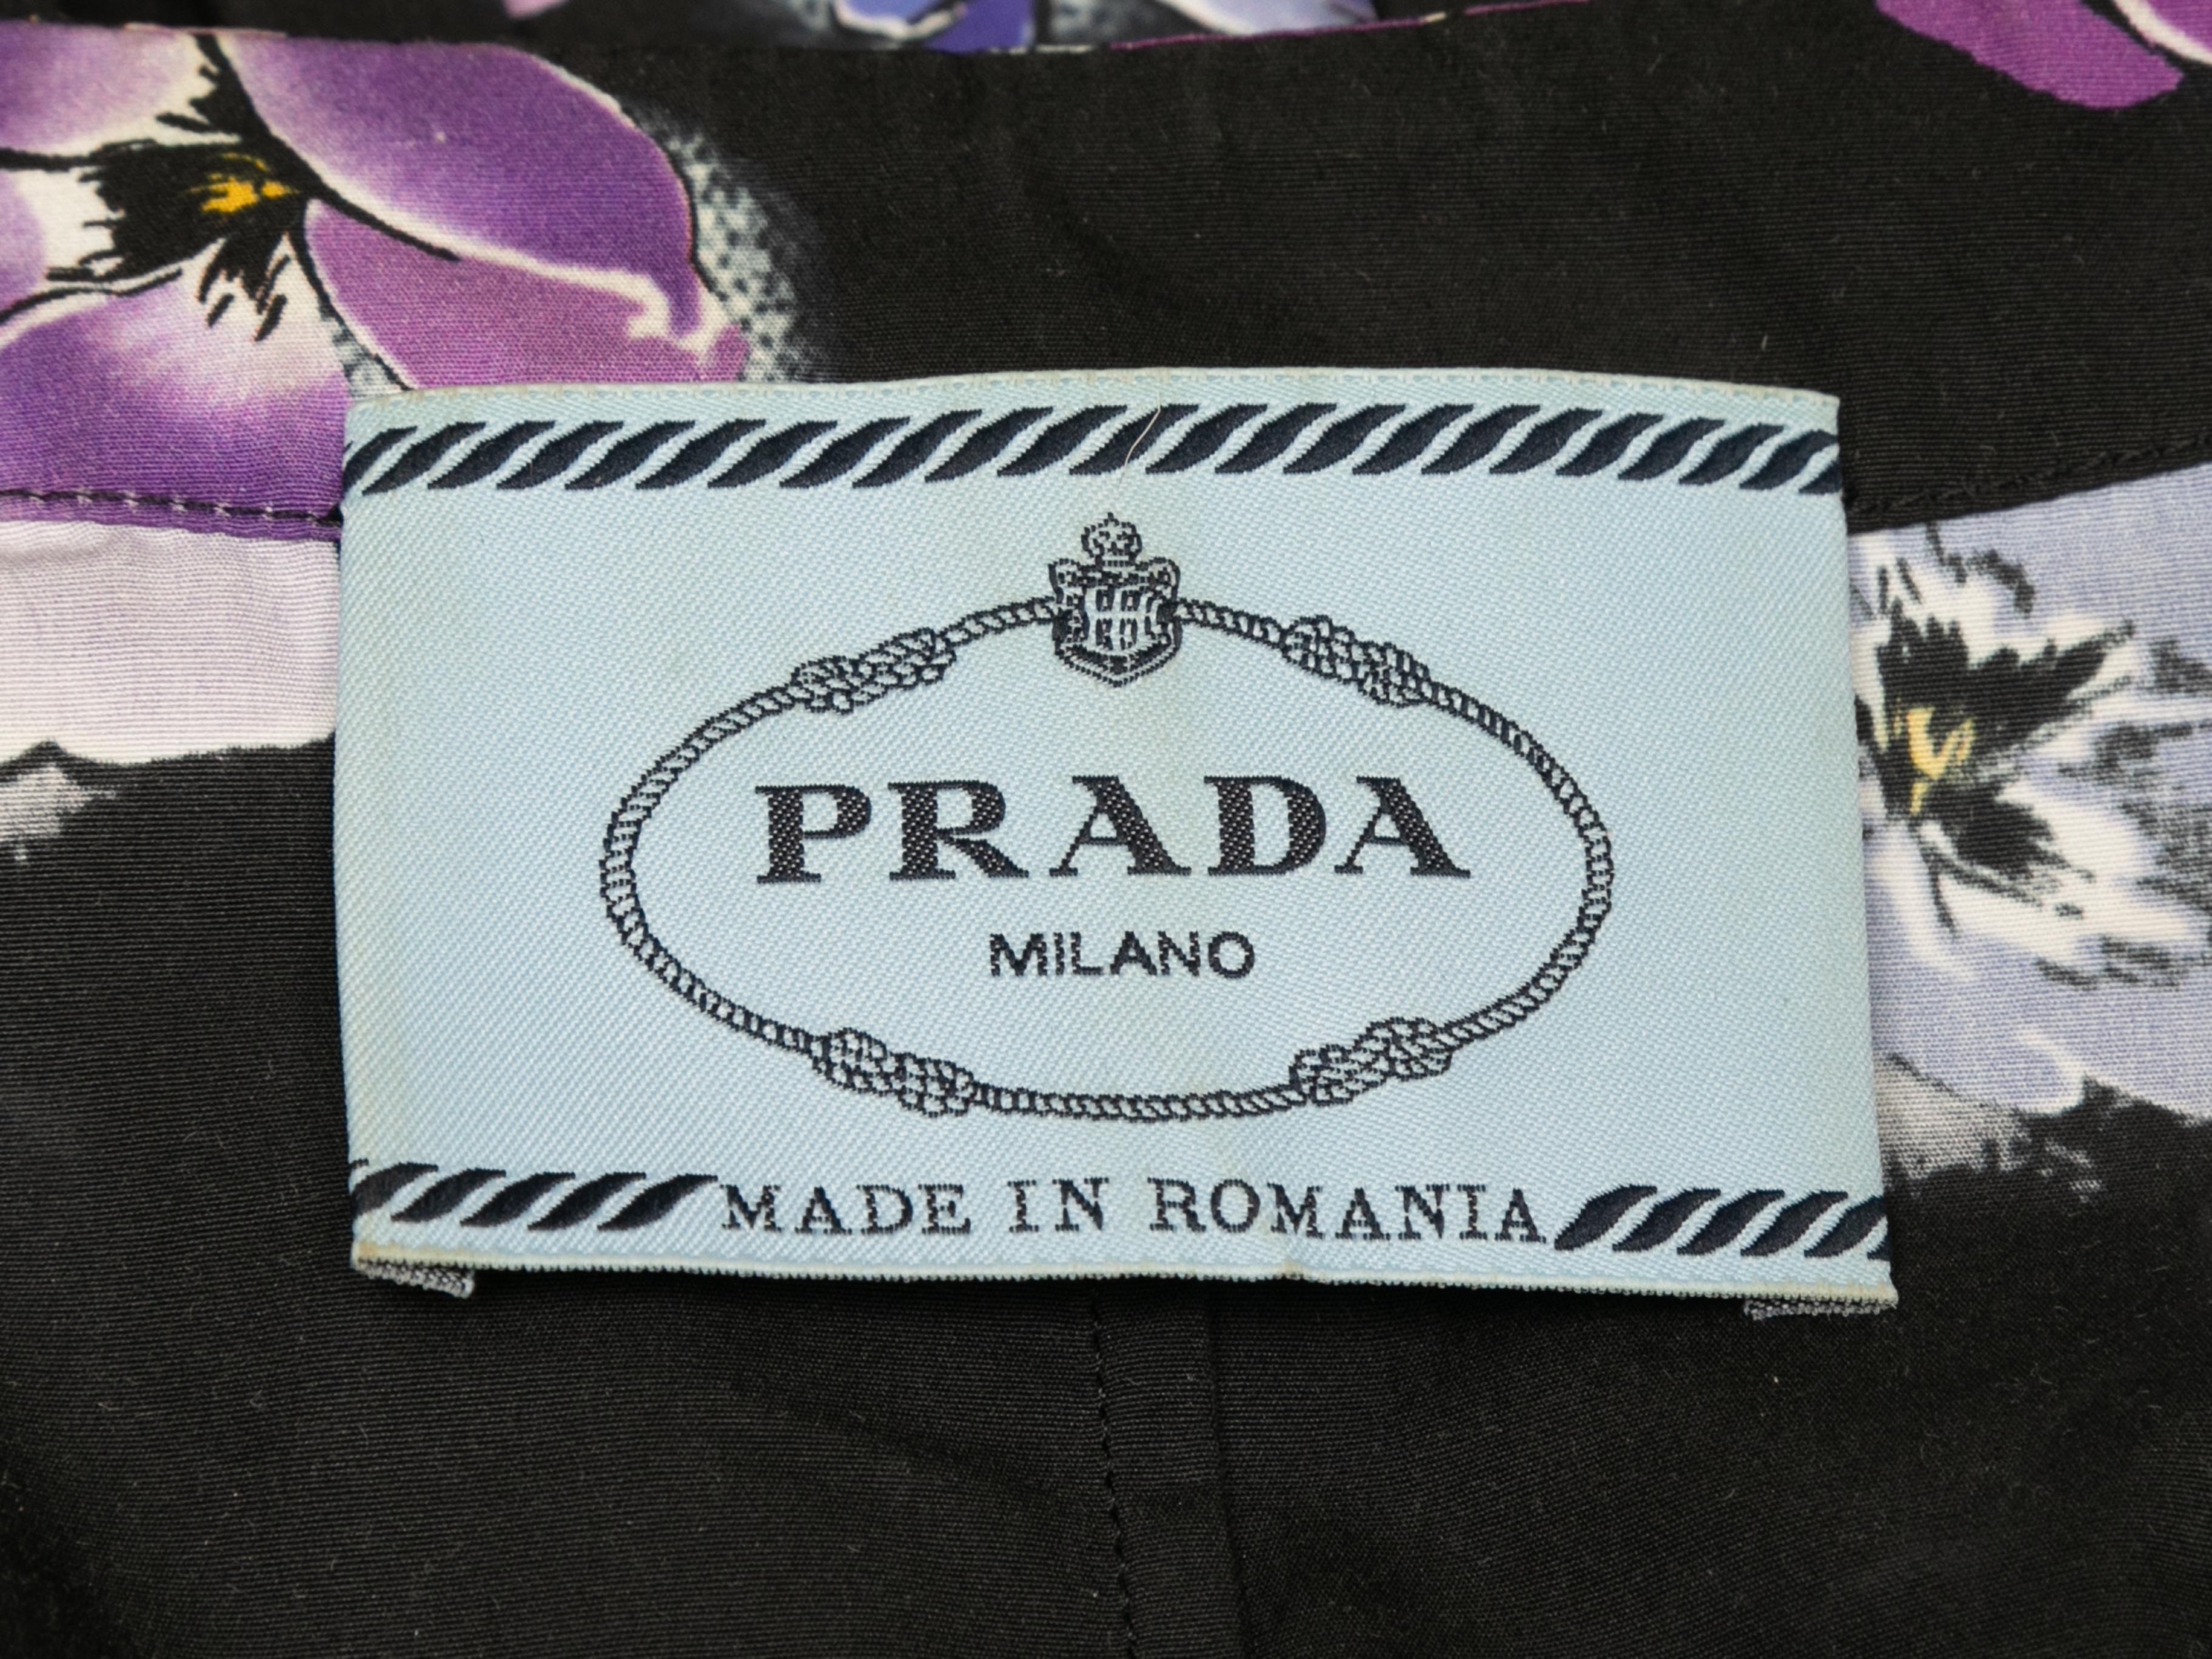 Black and purple pansy printed sleeveless dress by Prada. Crew neck. Sash tie at waist. Button closures at center front. 40